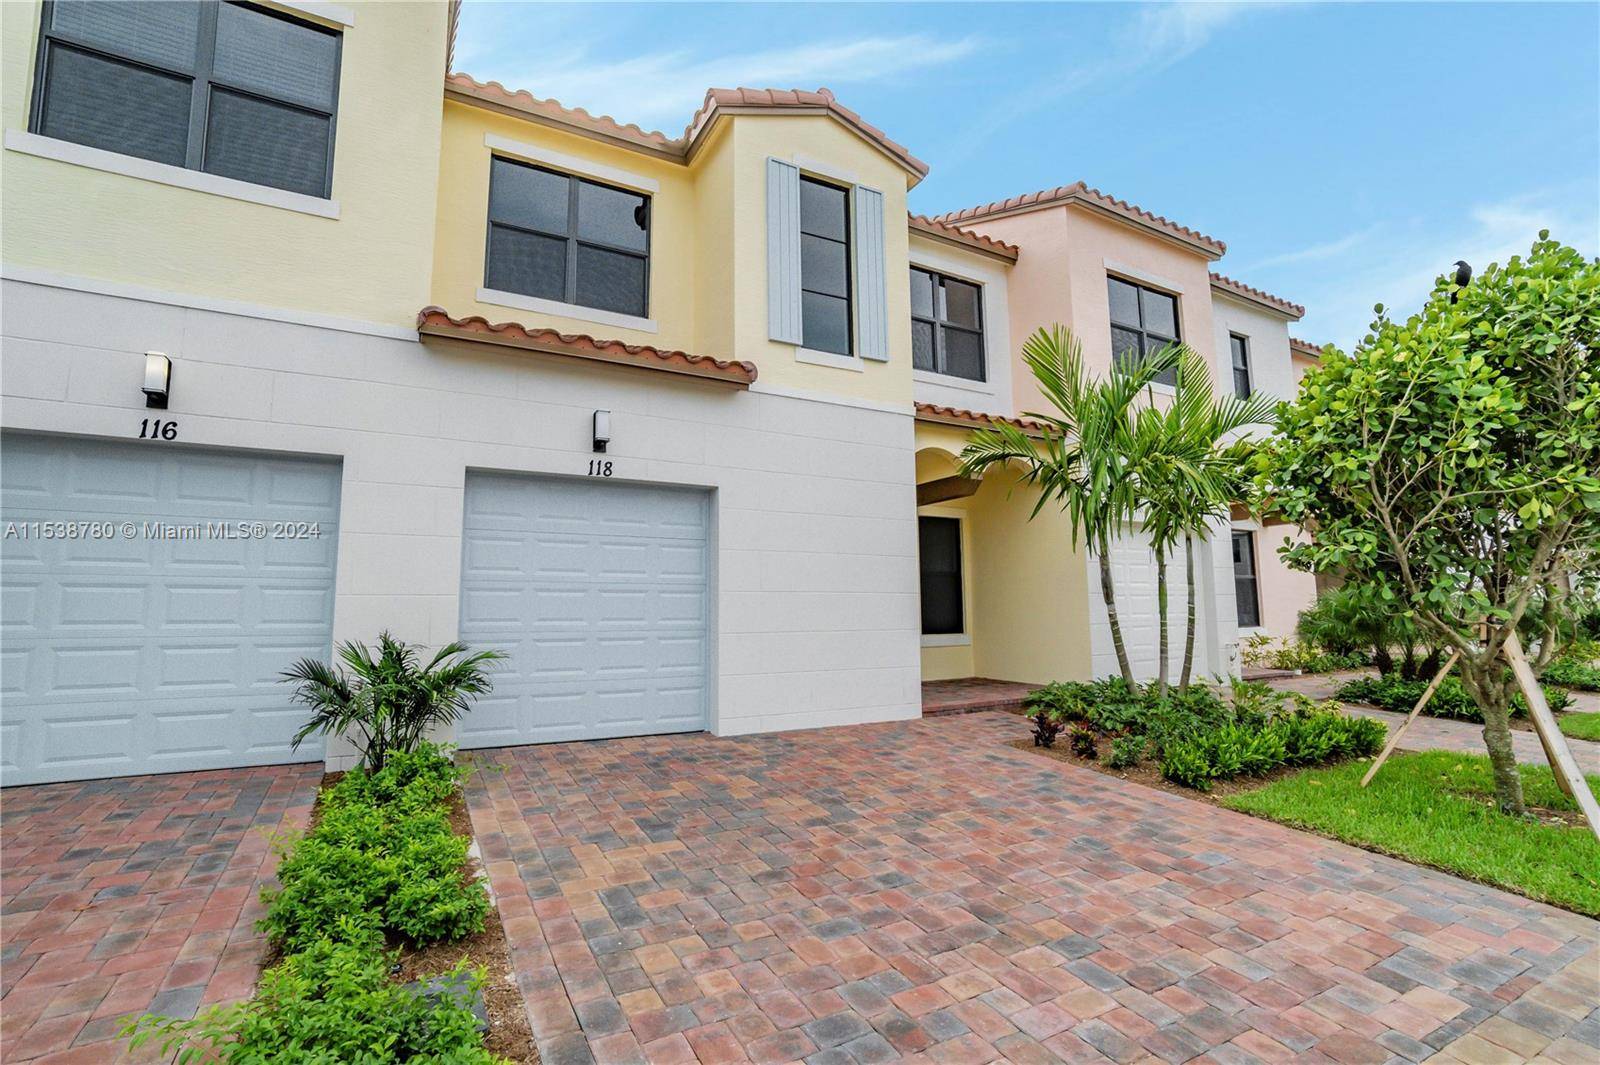 Stunning, like new townhome in West Pembroke Pines.